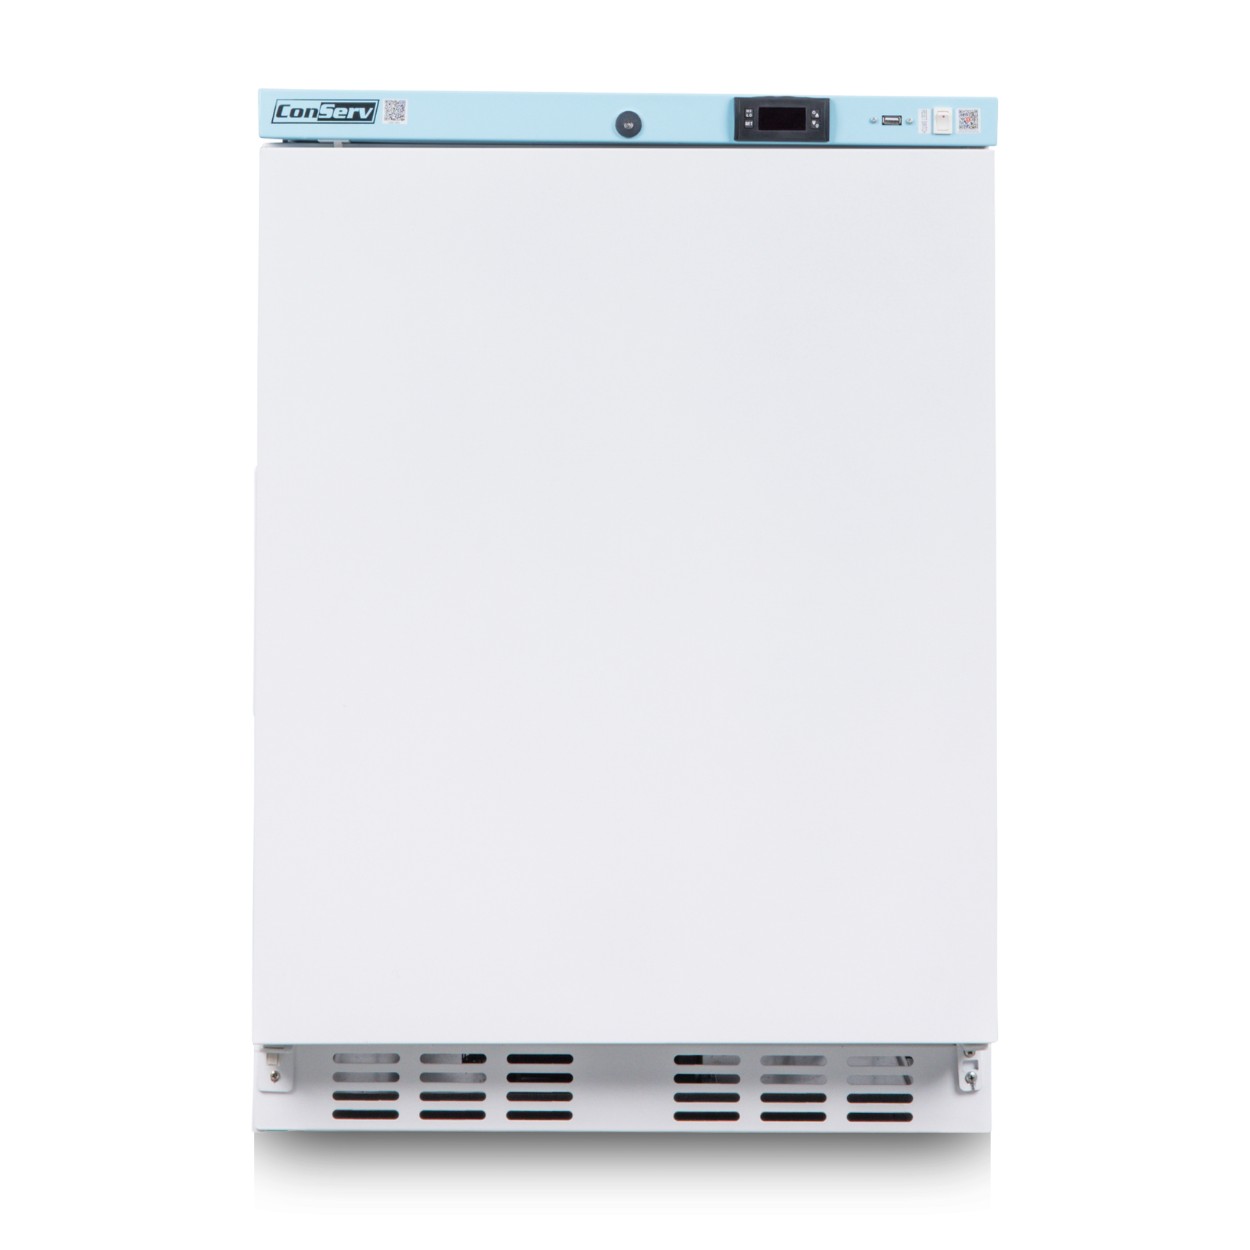 3.9 cu.ft. Commercial Refrigerator in White with Temperature Alarm